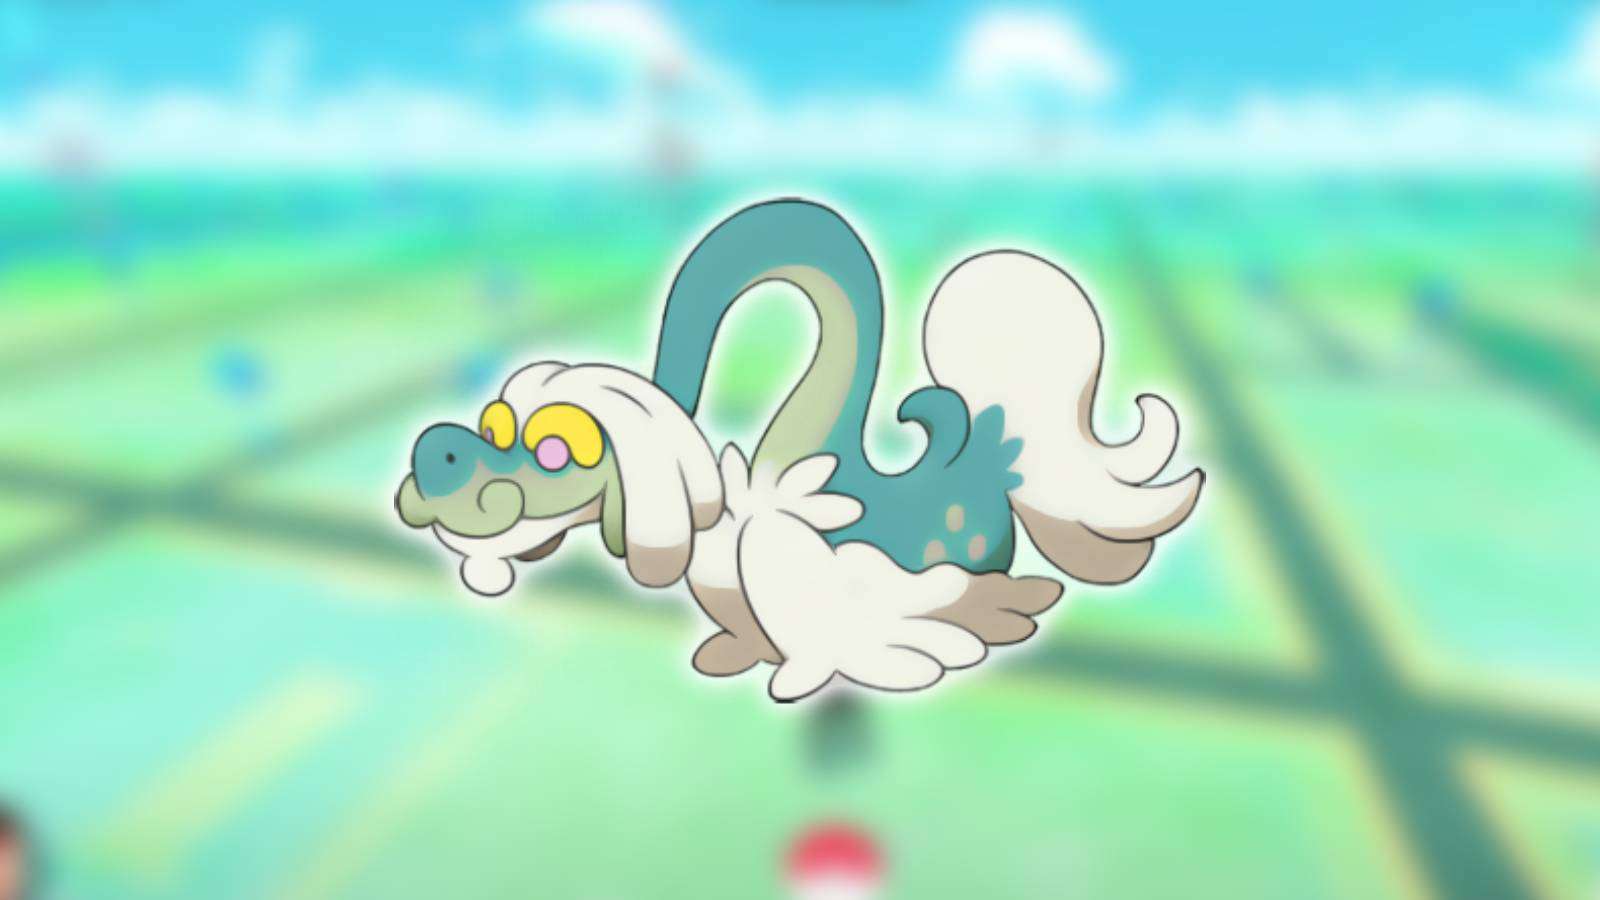 The dragon type Pokemon Drampa appears against a blurred background